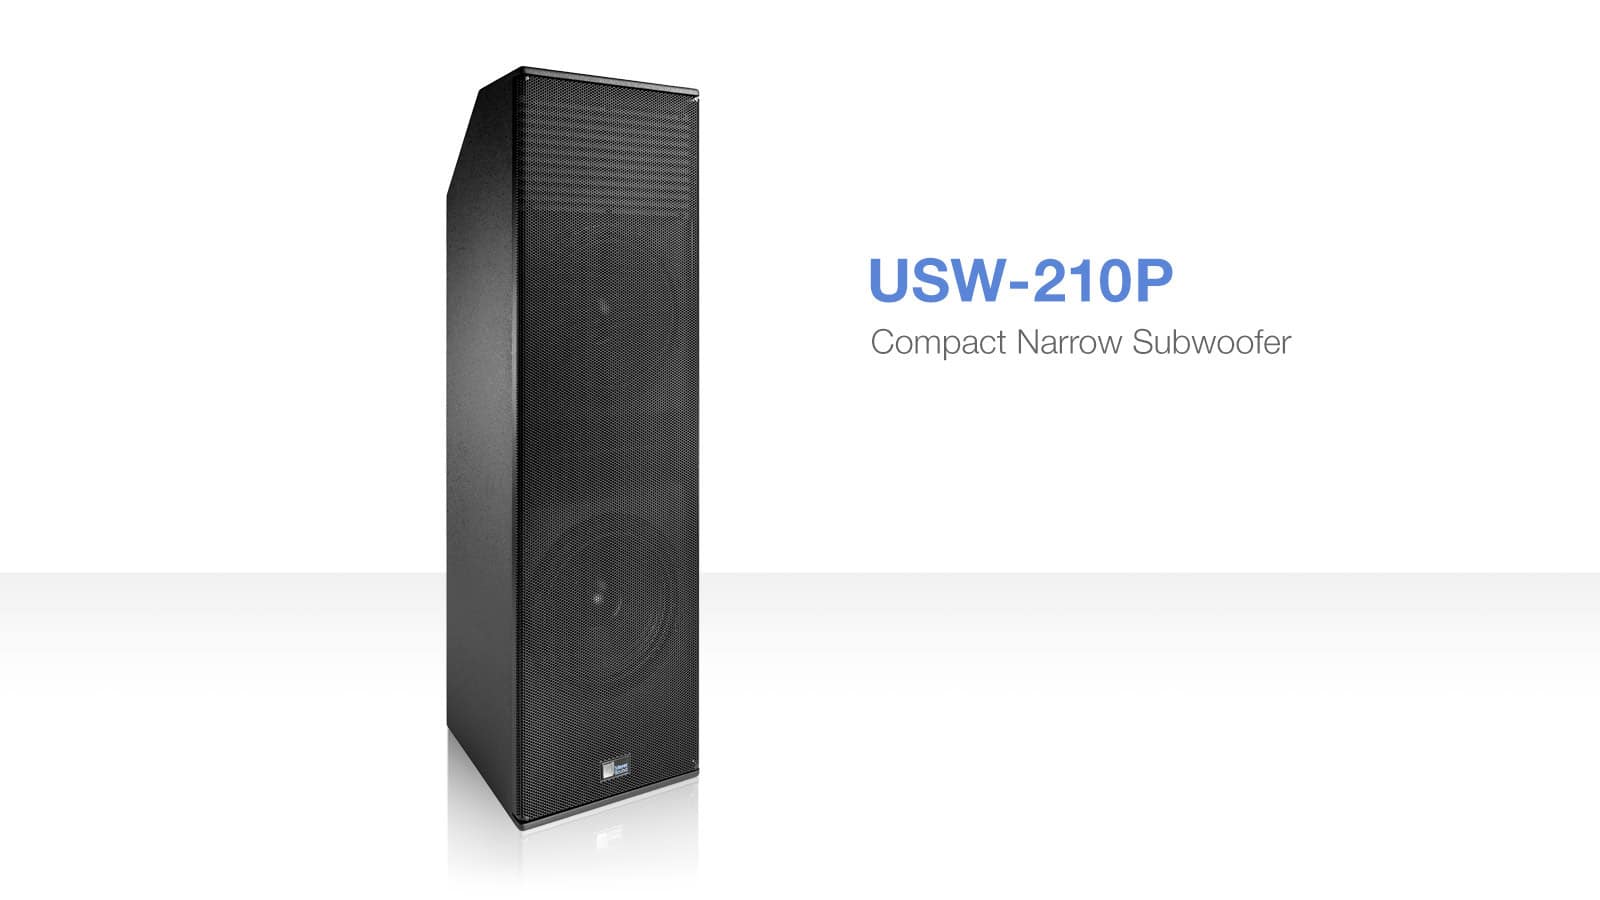 New Meyer Sound USW-210P Compact Narrow Subwoofer Fits Forceful Bass into a Tight Space